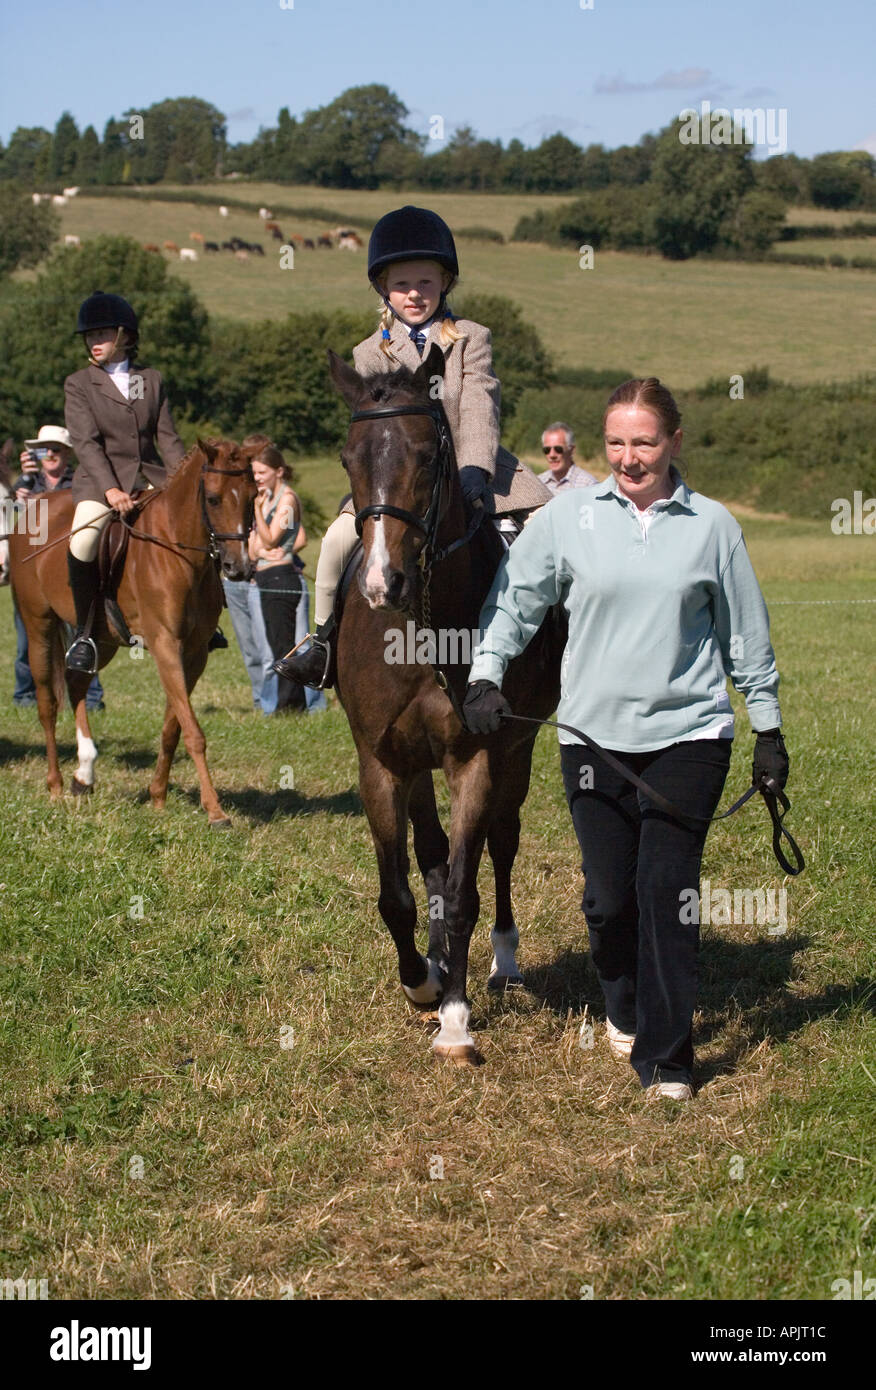 LITTLE GIRL AGED EIGHT RIDING PONY IN RIDING OUTFIT CLOTHES WITH ADULT LEADING PONY AT PONY CLUB EVENT UK Stock Photo